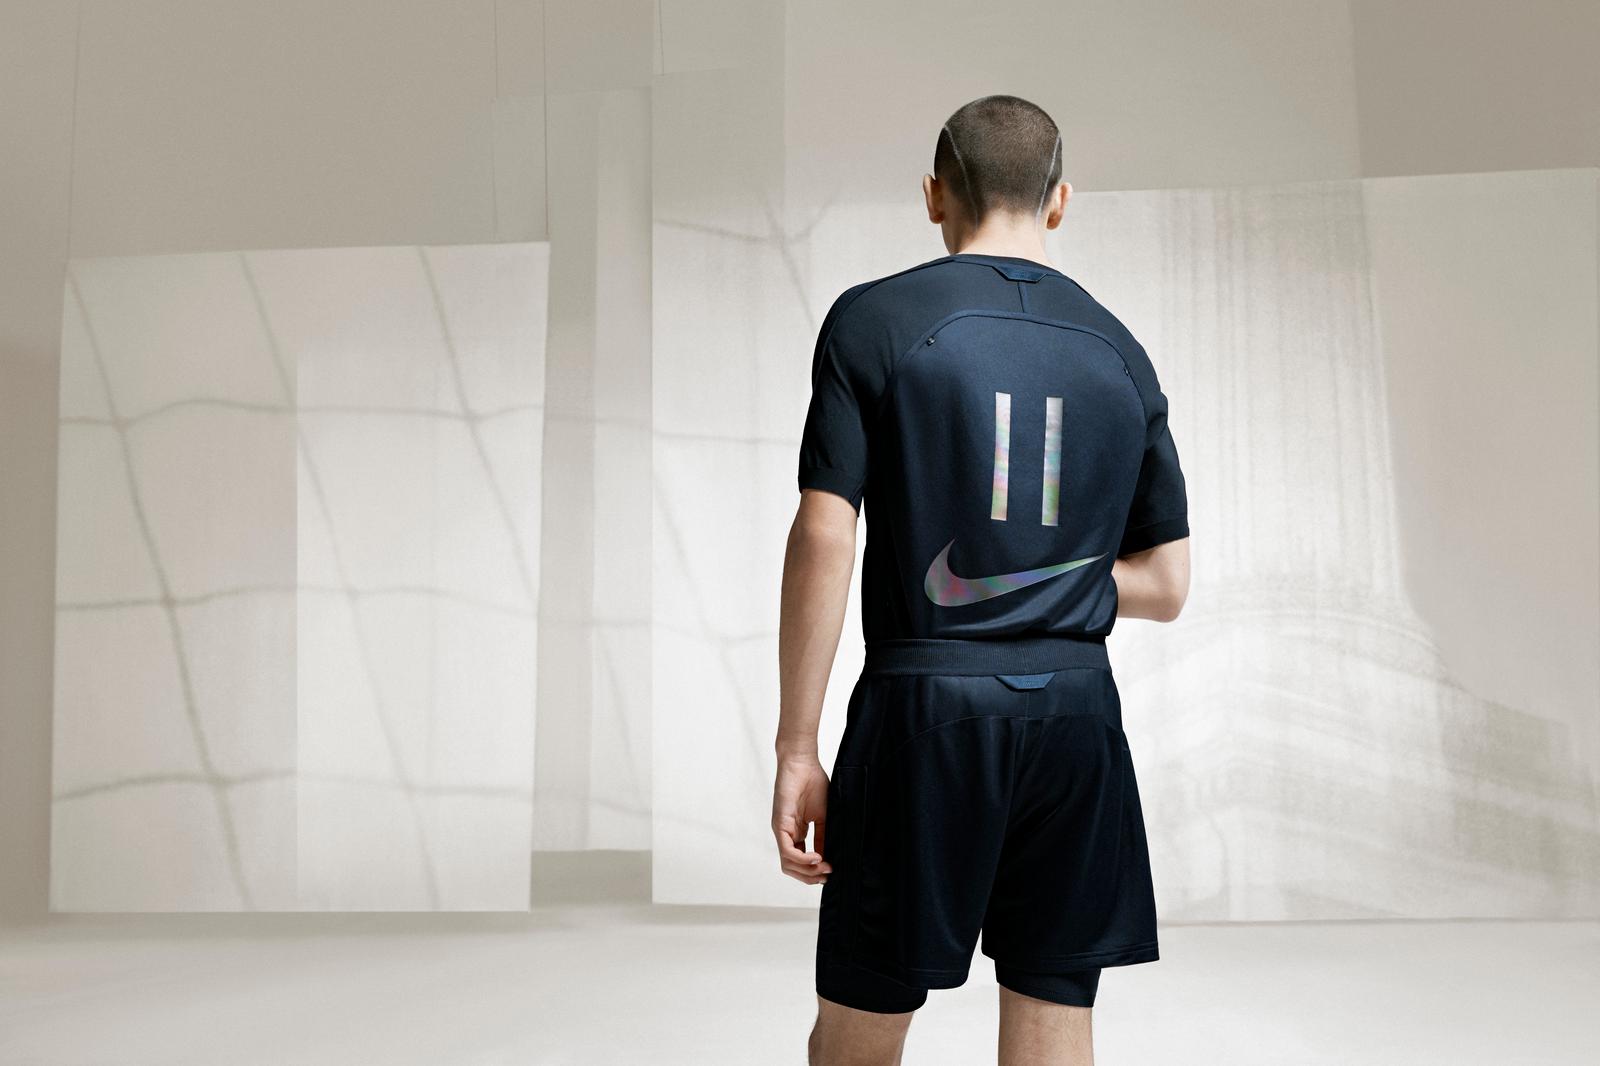 Nike x Kim Jones "Football Reimagined" Collection Revealed - Footy